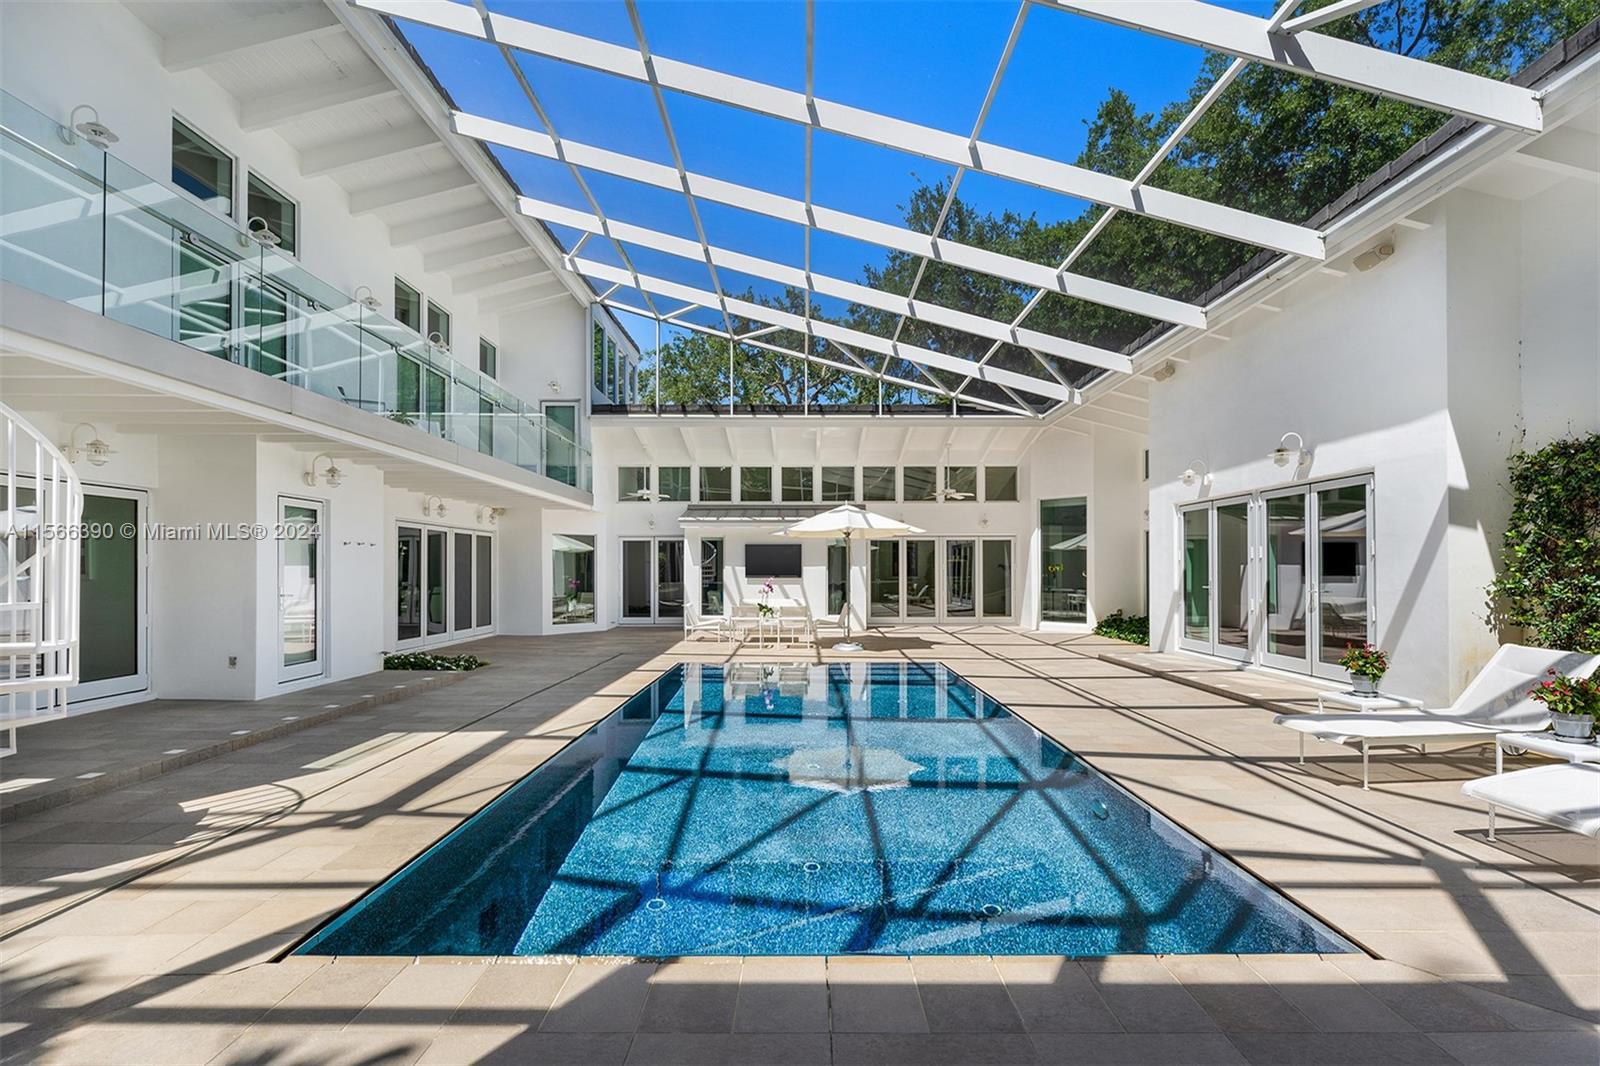 Completely renovated Mid-Century modern estate in "The Moorings" Coconut Grove gated community, with